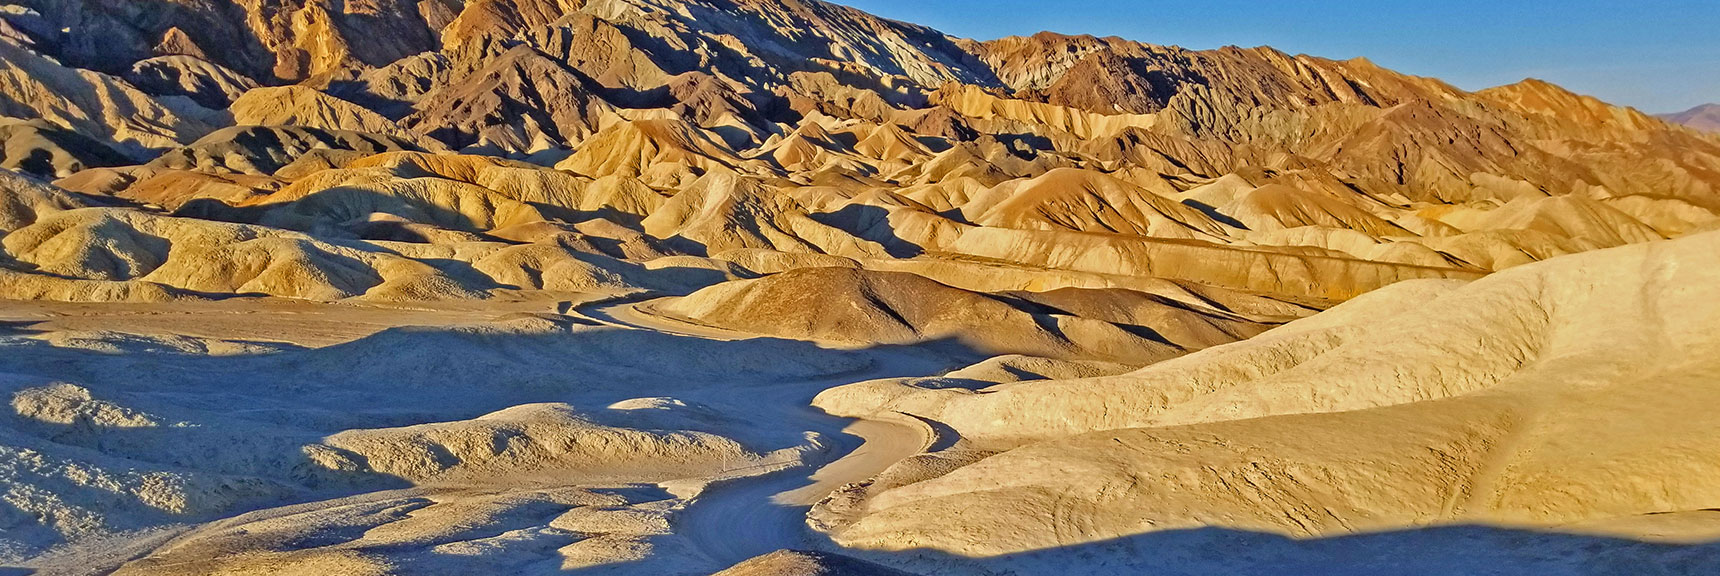 Canyon Route Winds Below | Twenty Mule Team Canyon | Death Valley National Park, California